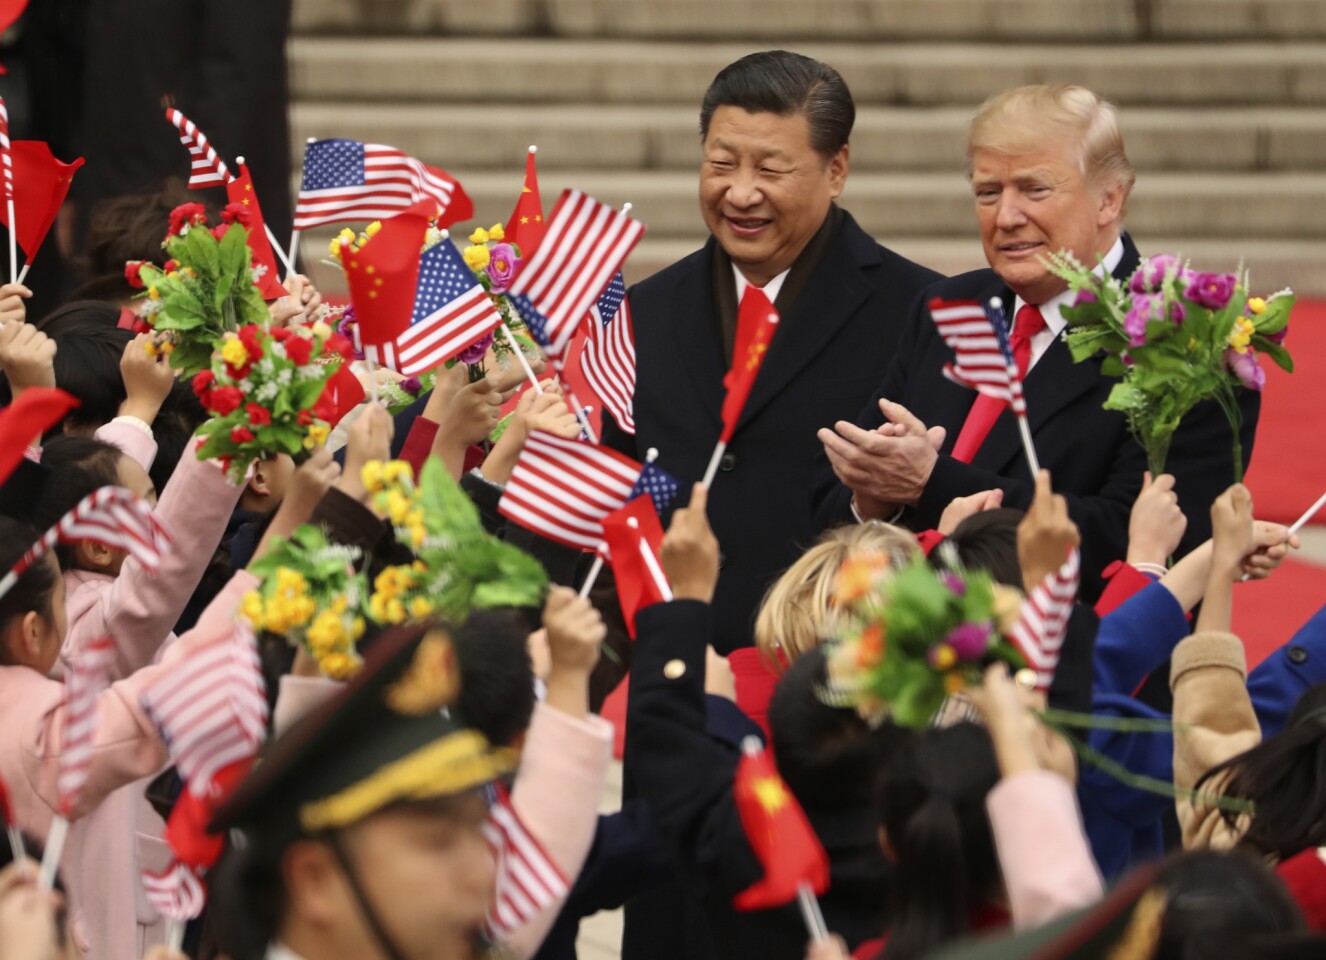 President Trump and Chinese President Xi Jinping at a welcoming ceremony at the Great Hall of the People in Beijing.